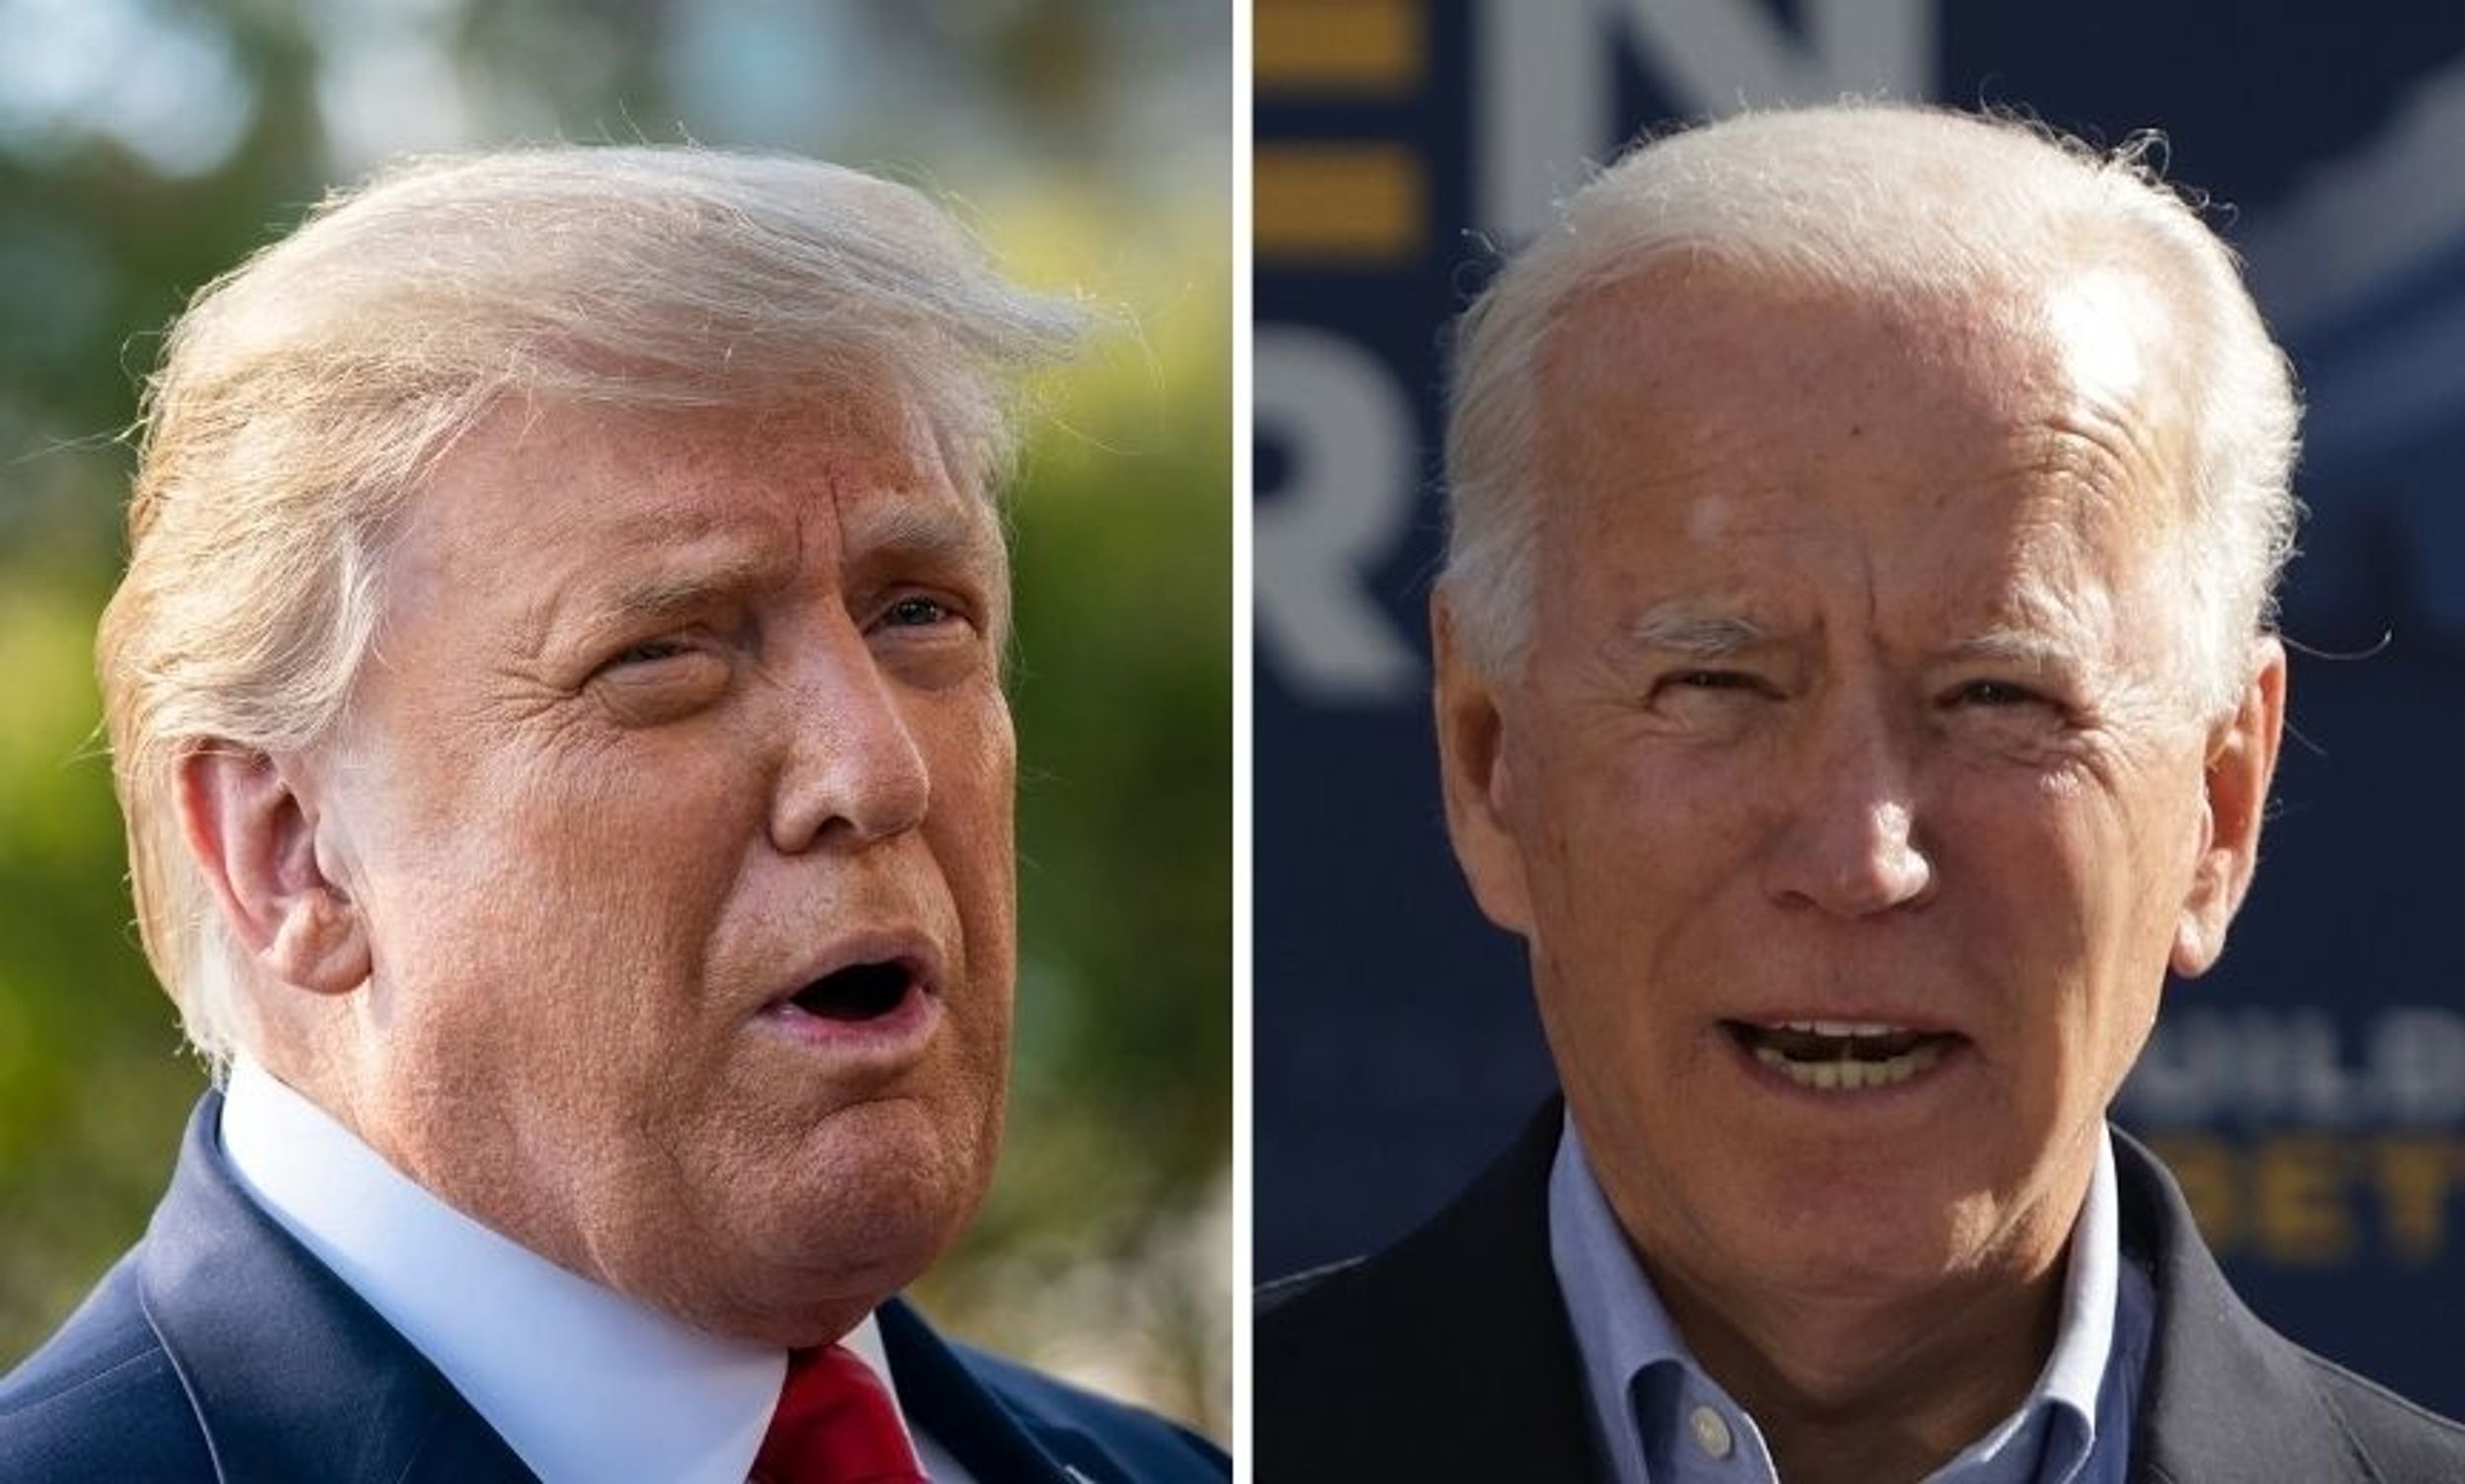 Trump Kept Coughing Through Bonkers Hannity Interview But Accused Biden of 'Choking Like a Dog'